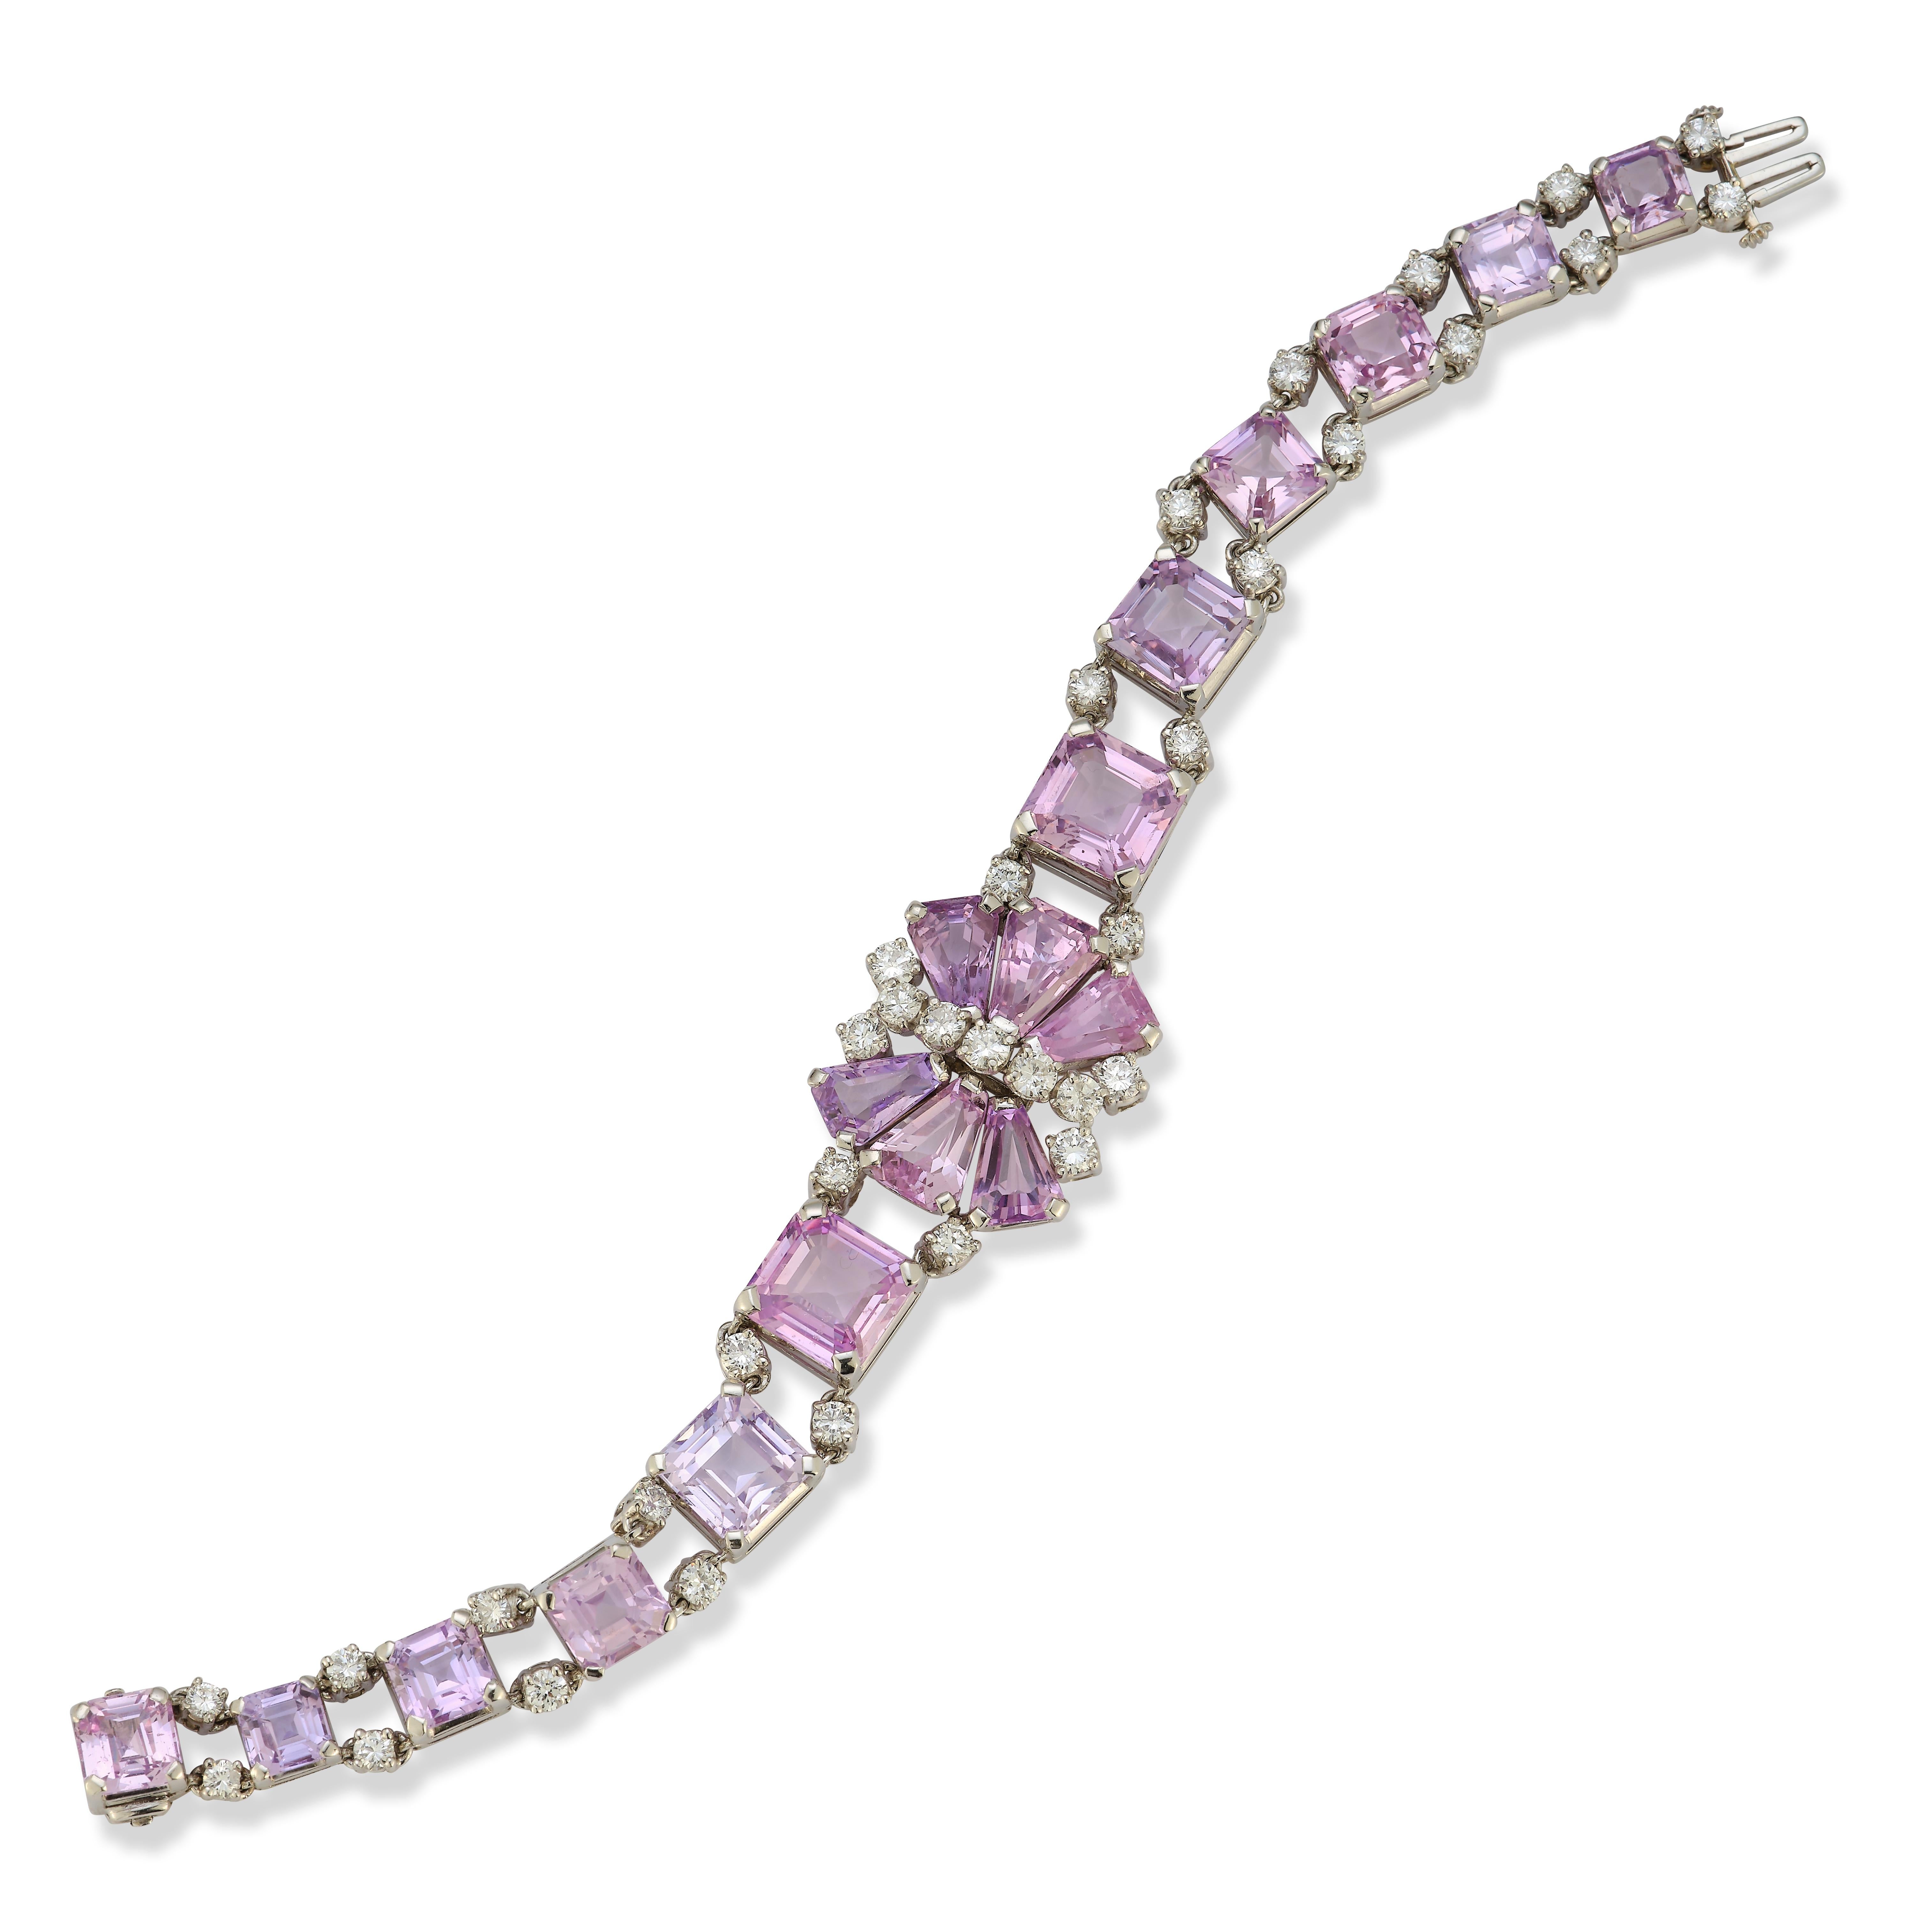 Oscar Heyman Brothers Pink Sapphire & Diamond Bracelet

A Platinum bracelet set with 6 central tapered baguette pink sapphires flanked on both sides by 12 graduating square pink sapphires, accented throughout by 35 round cut diamonds

Signed Oscar